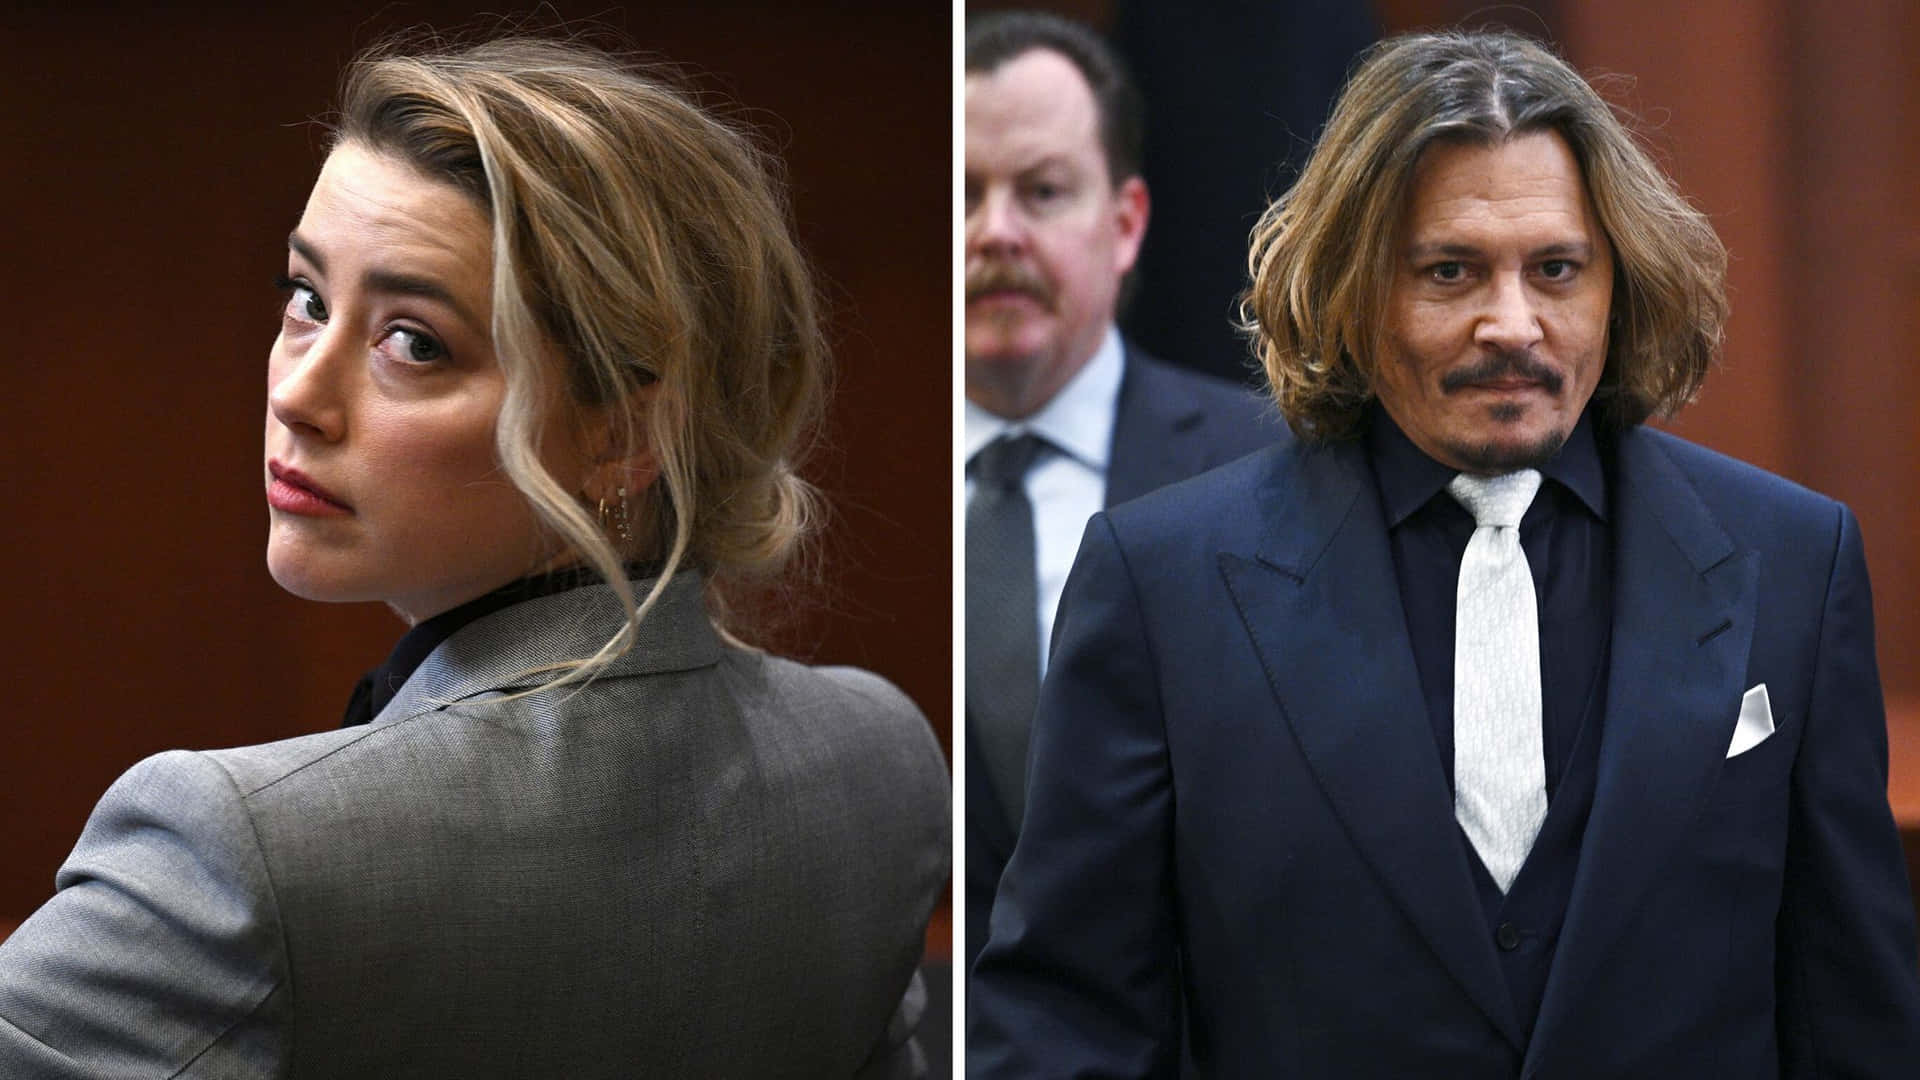 Johnny Depp And A Woman In A Suit